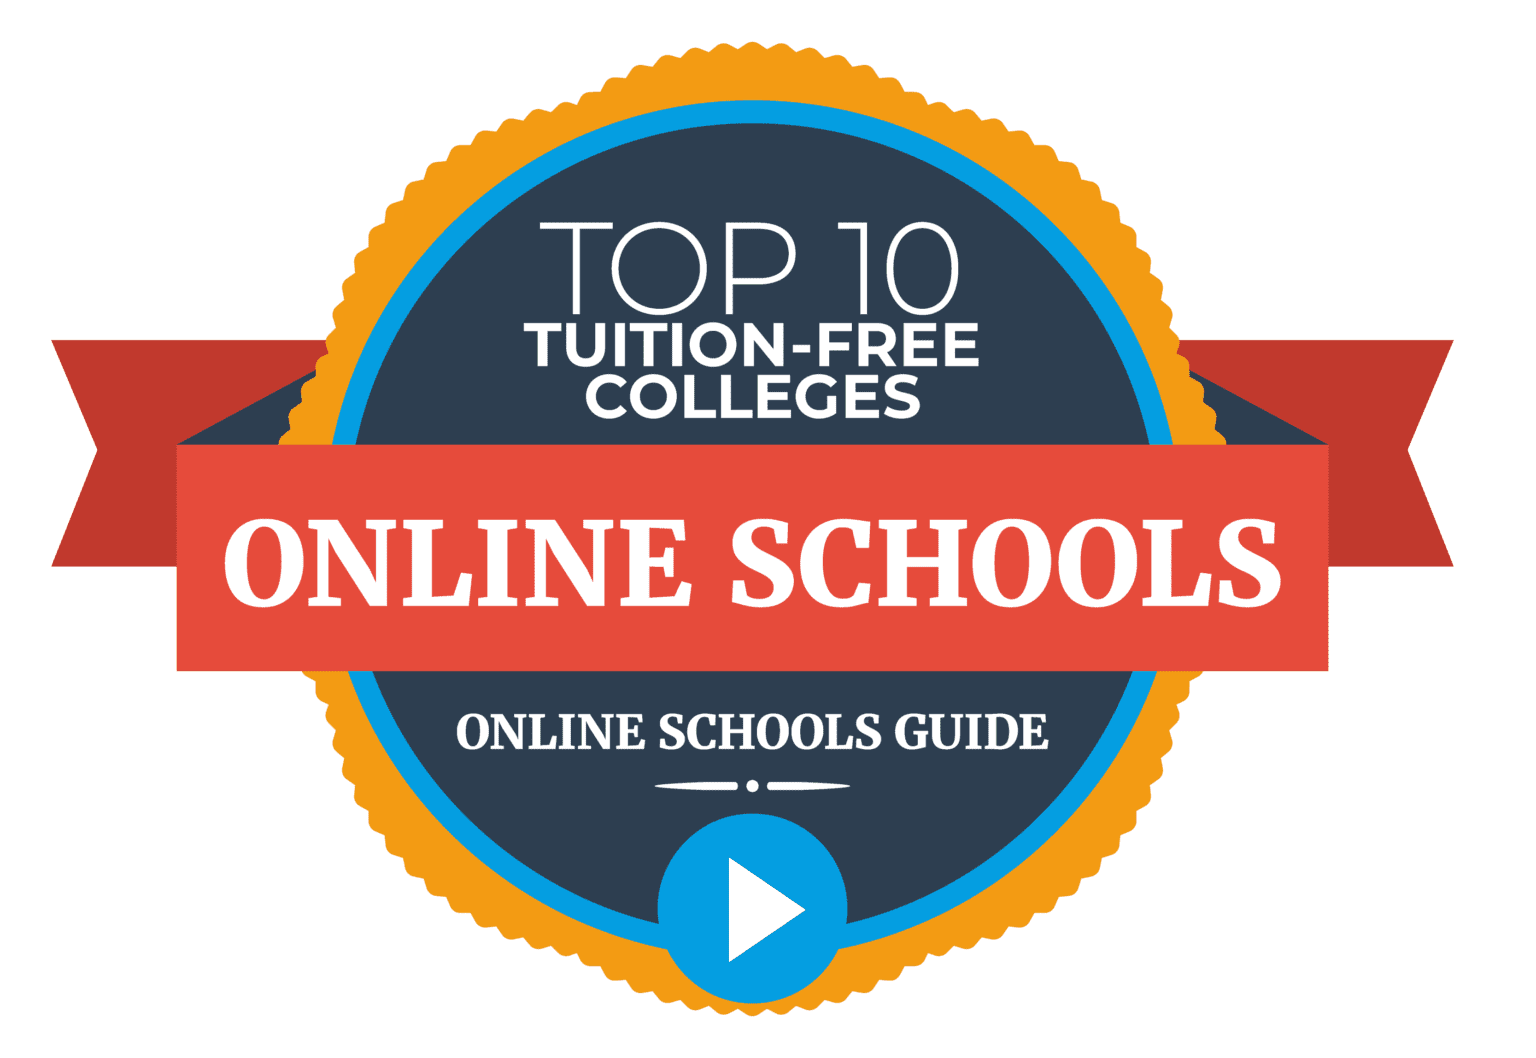 10 Top Tuition Free Colleges Online Online Schools Guide